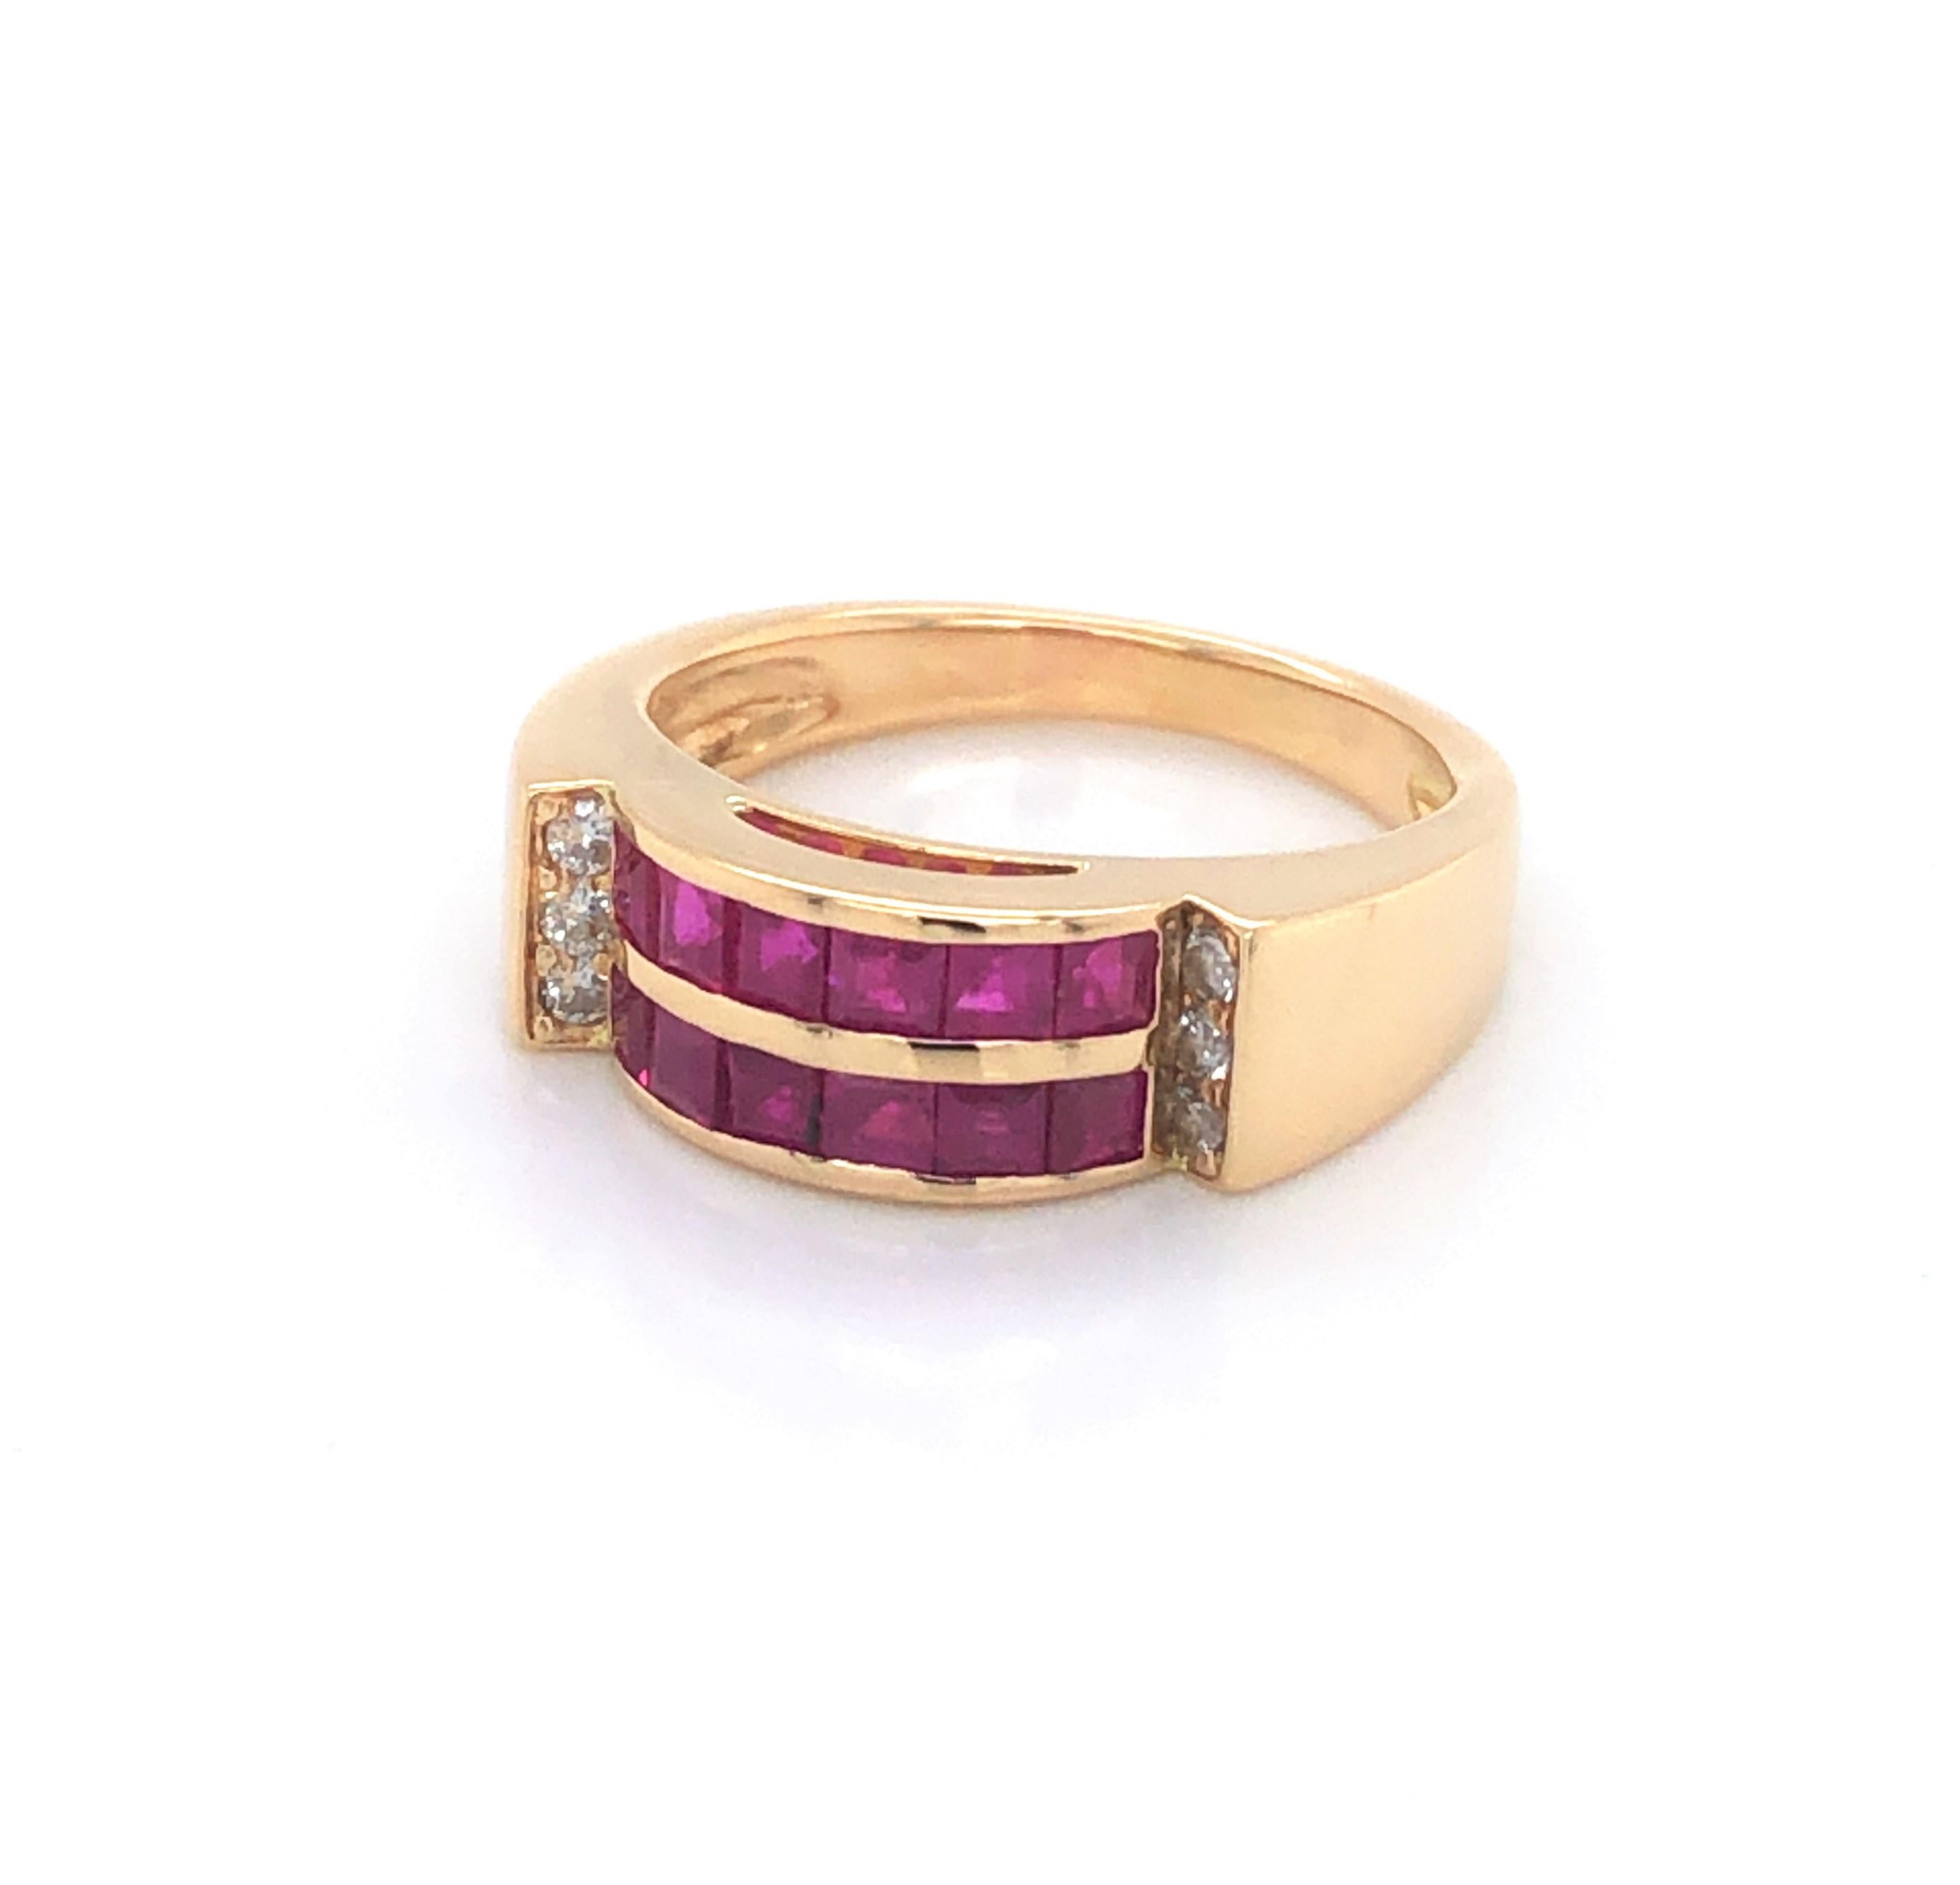 Better by the dozen are the rosy red rubies demurely accented by the round cut diamond accent sidelights on this contemporary style ring. This cheerful band is made of eighteen karat 18k yellow gold and set with two rows of six each .02 carat square